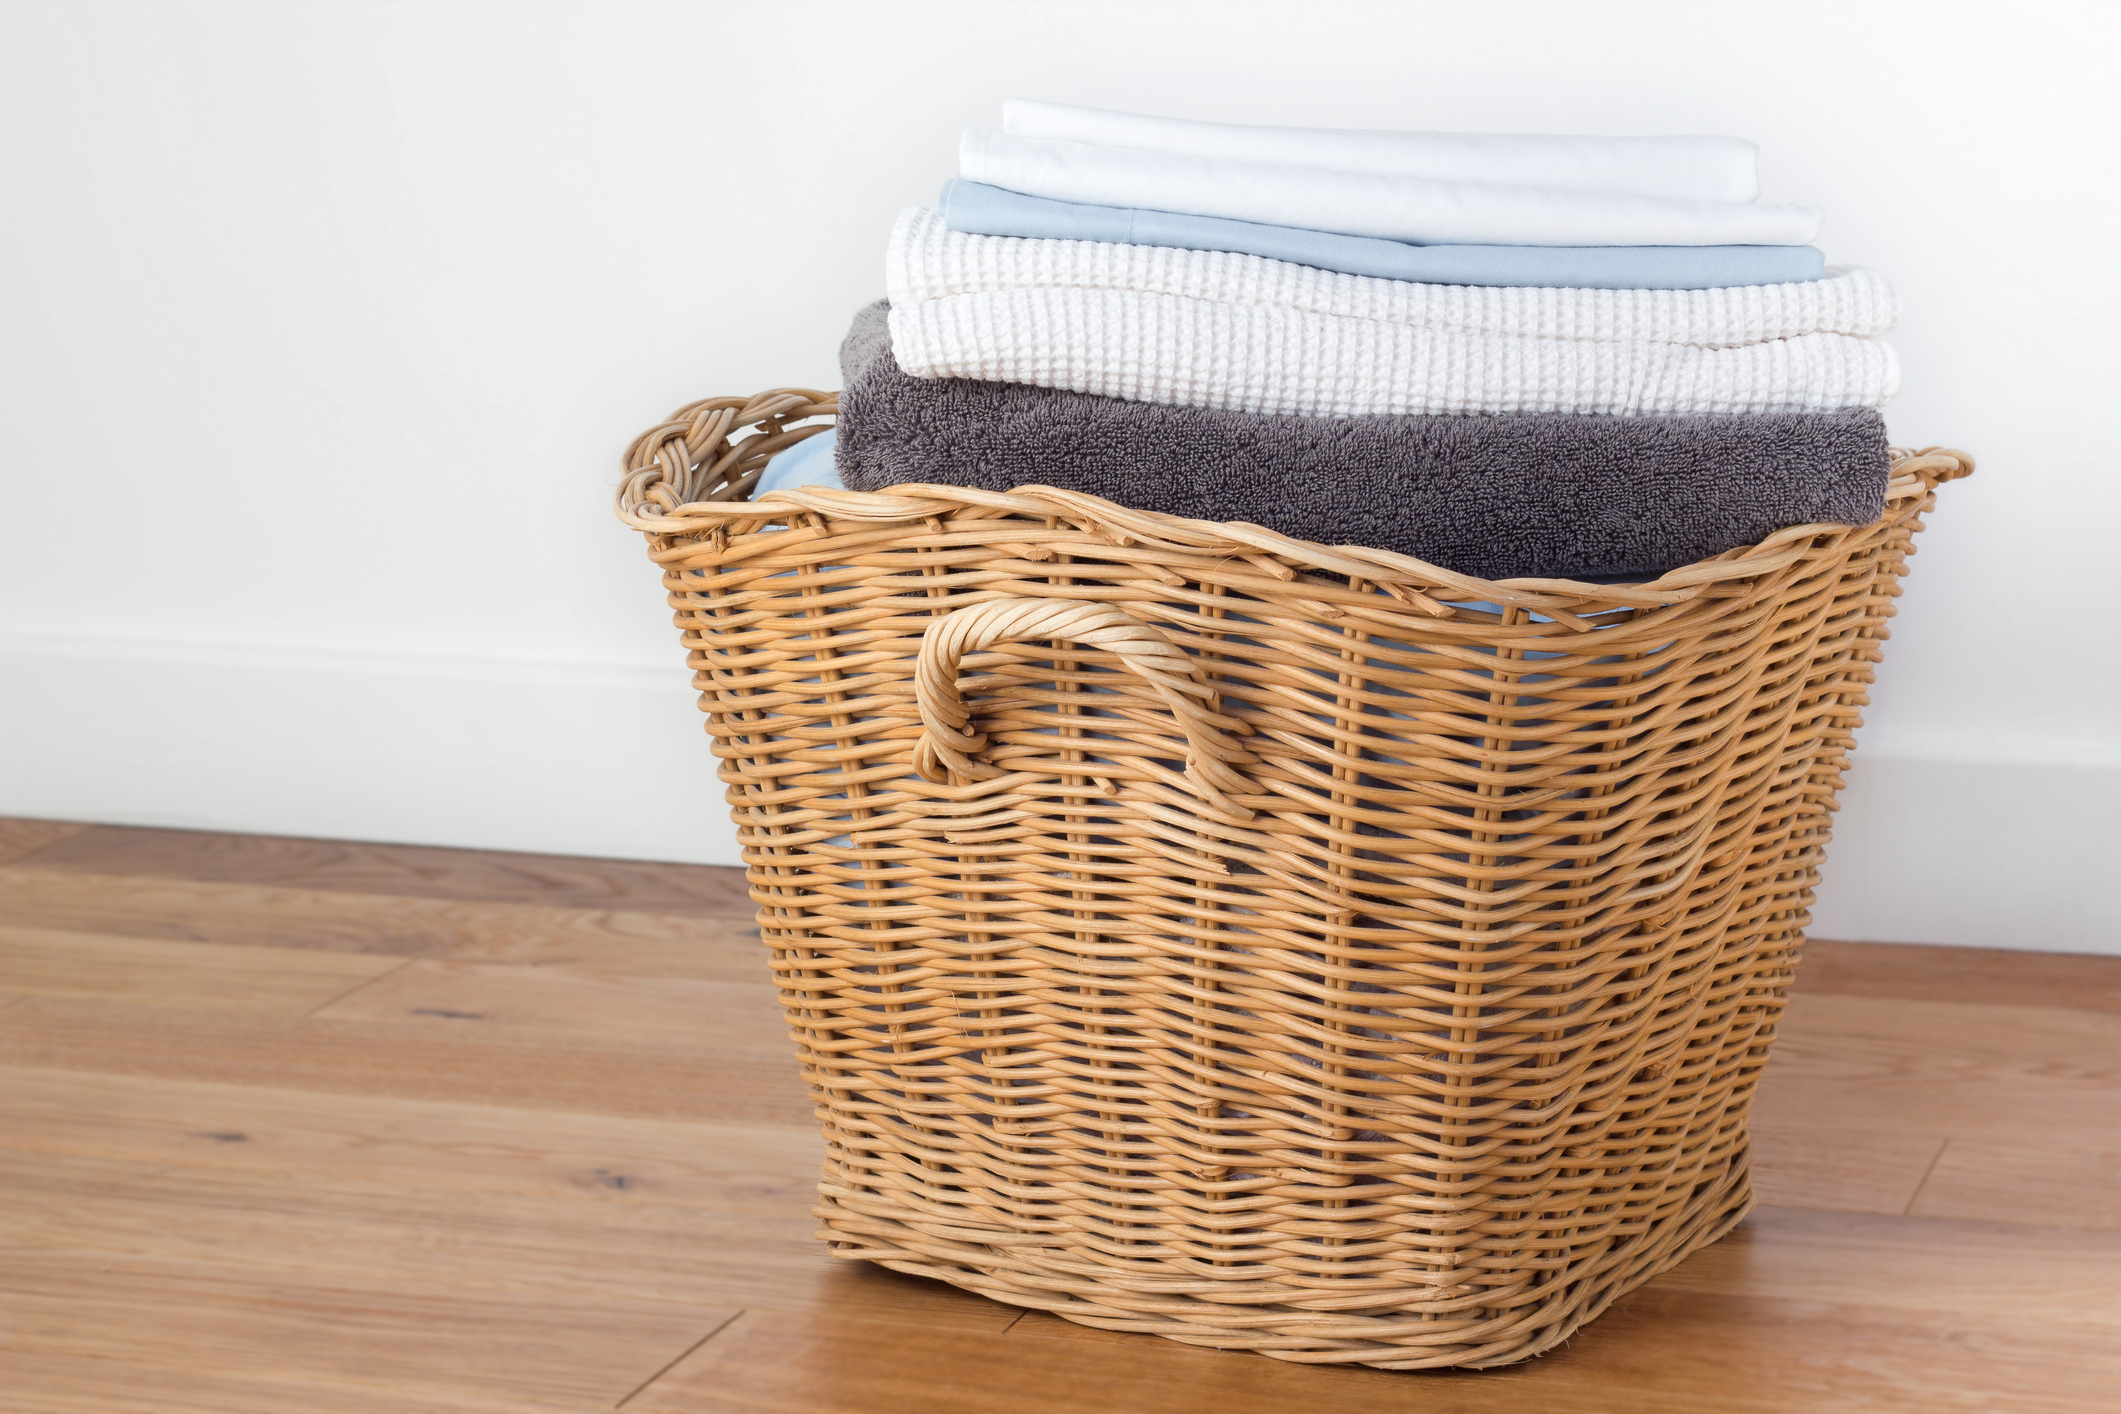 Basket of Clean Towels and Sheets